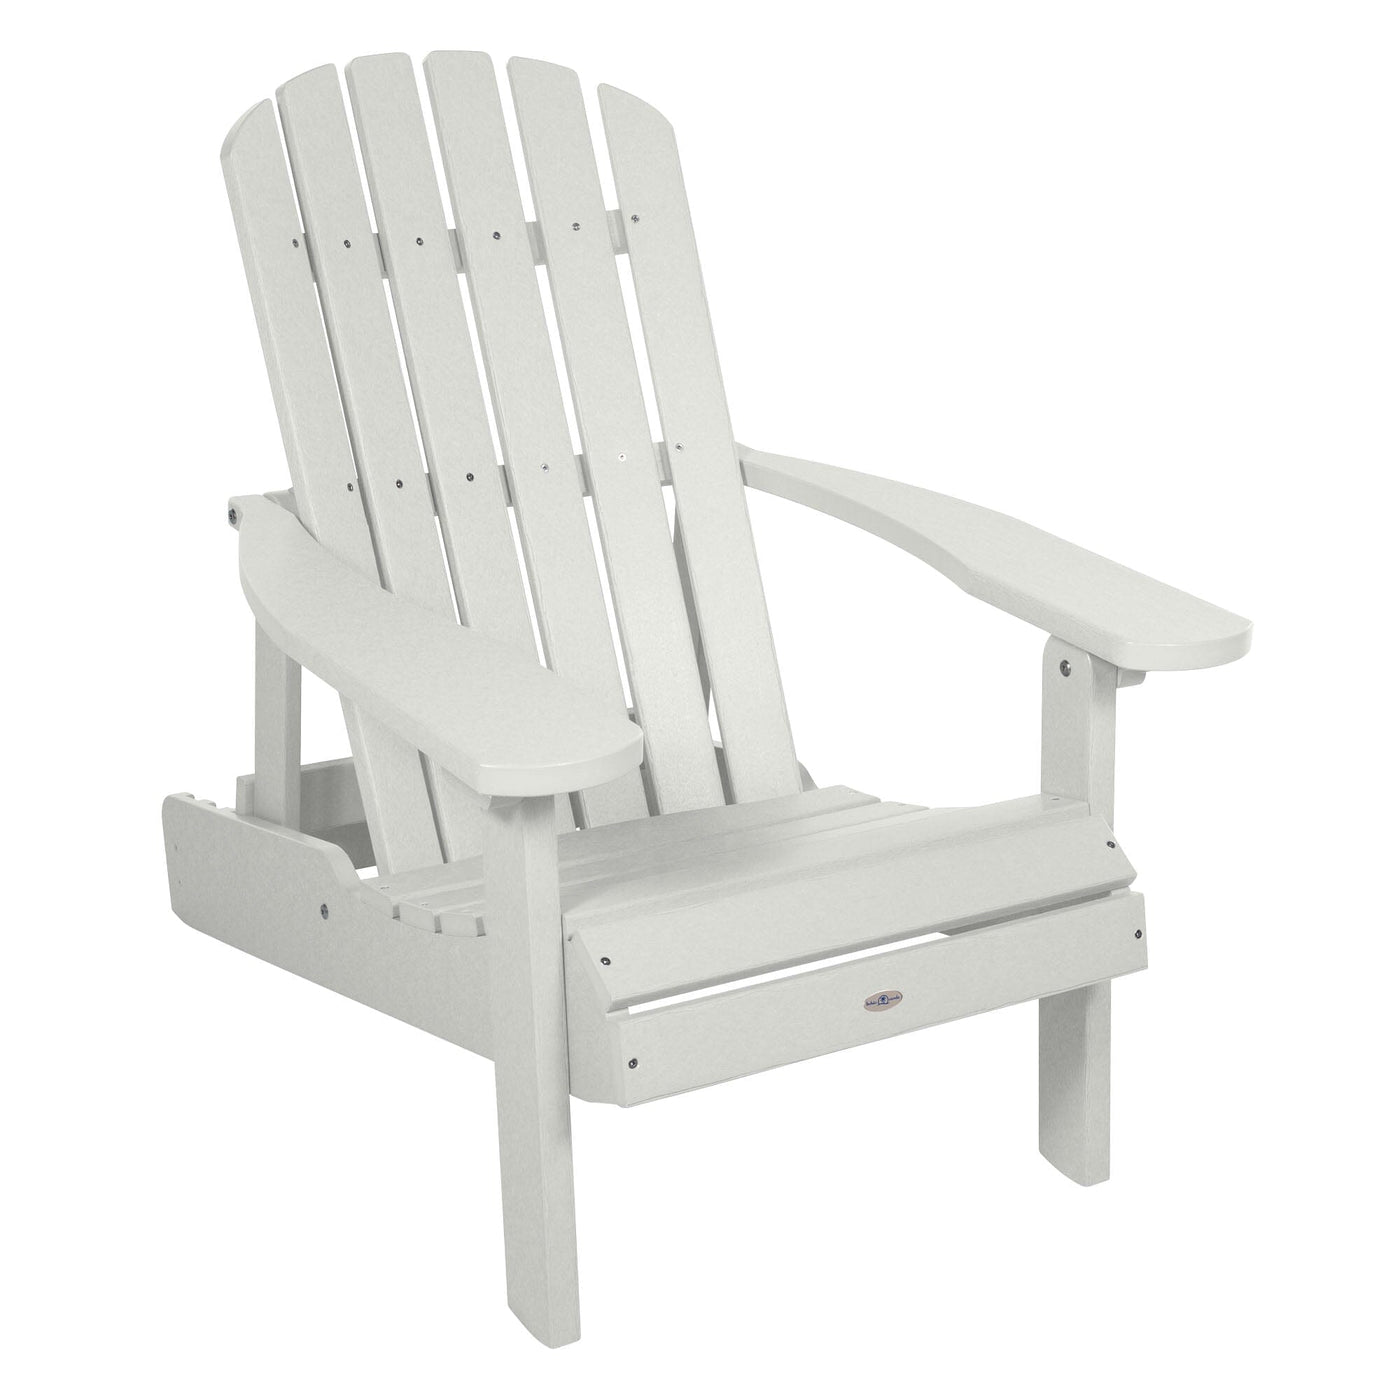 Cape Folding and Reclining Adirondack Chair Chair Bahia Verde Outdoors Coconut White 